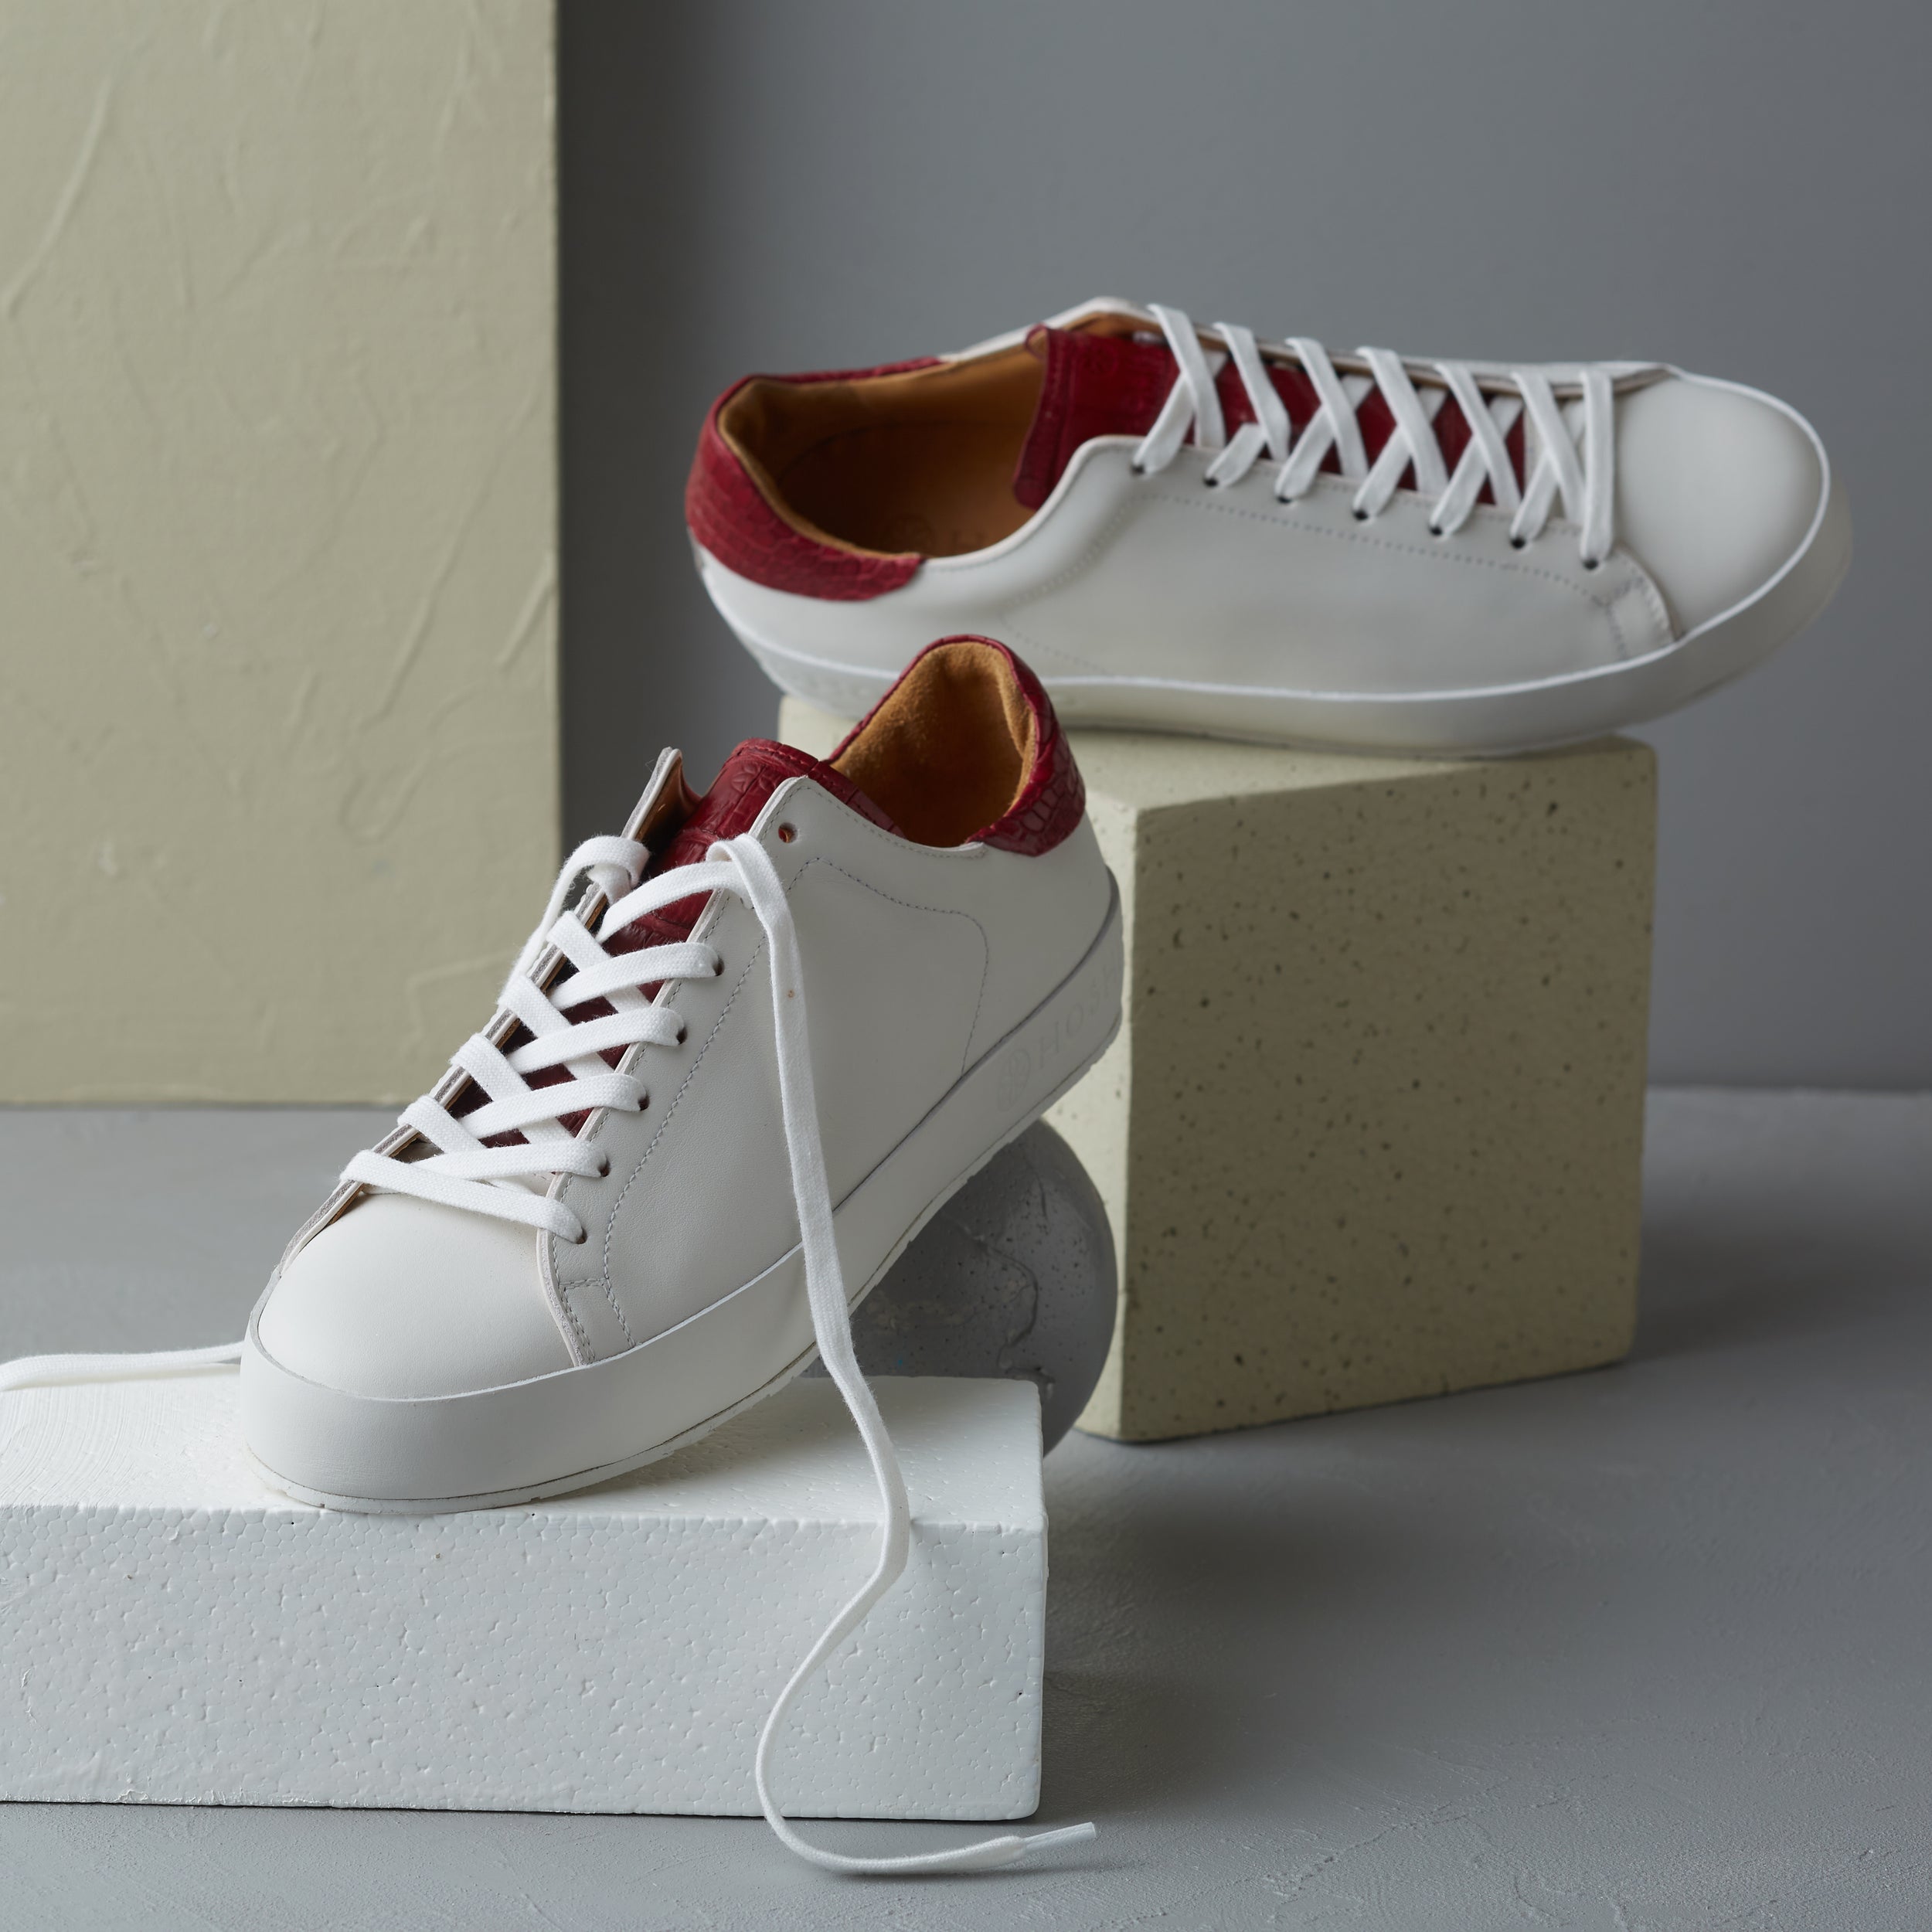 [women's] Liberte - low-top sneakers - combination tongue white and burgundy crocodile